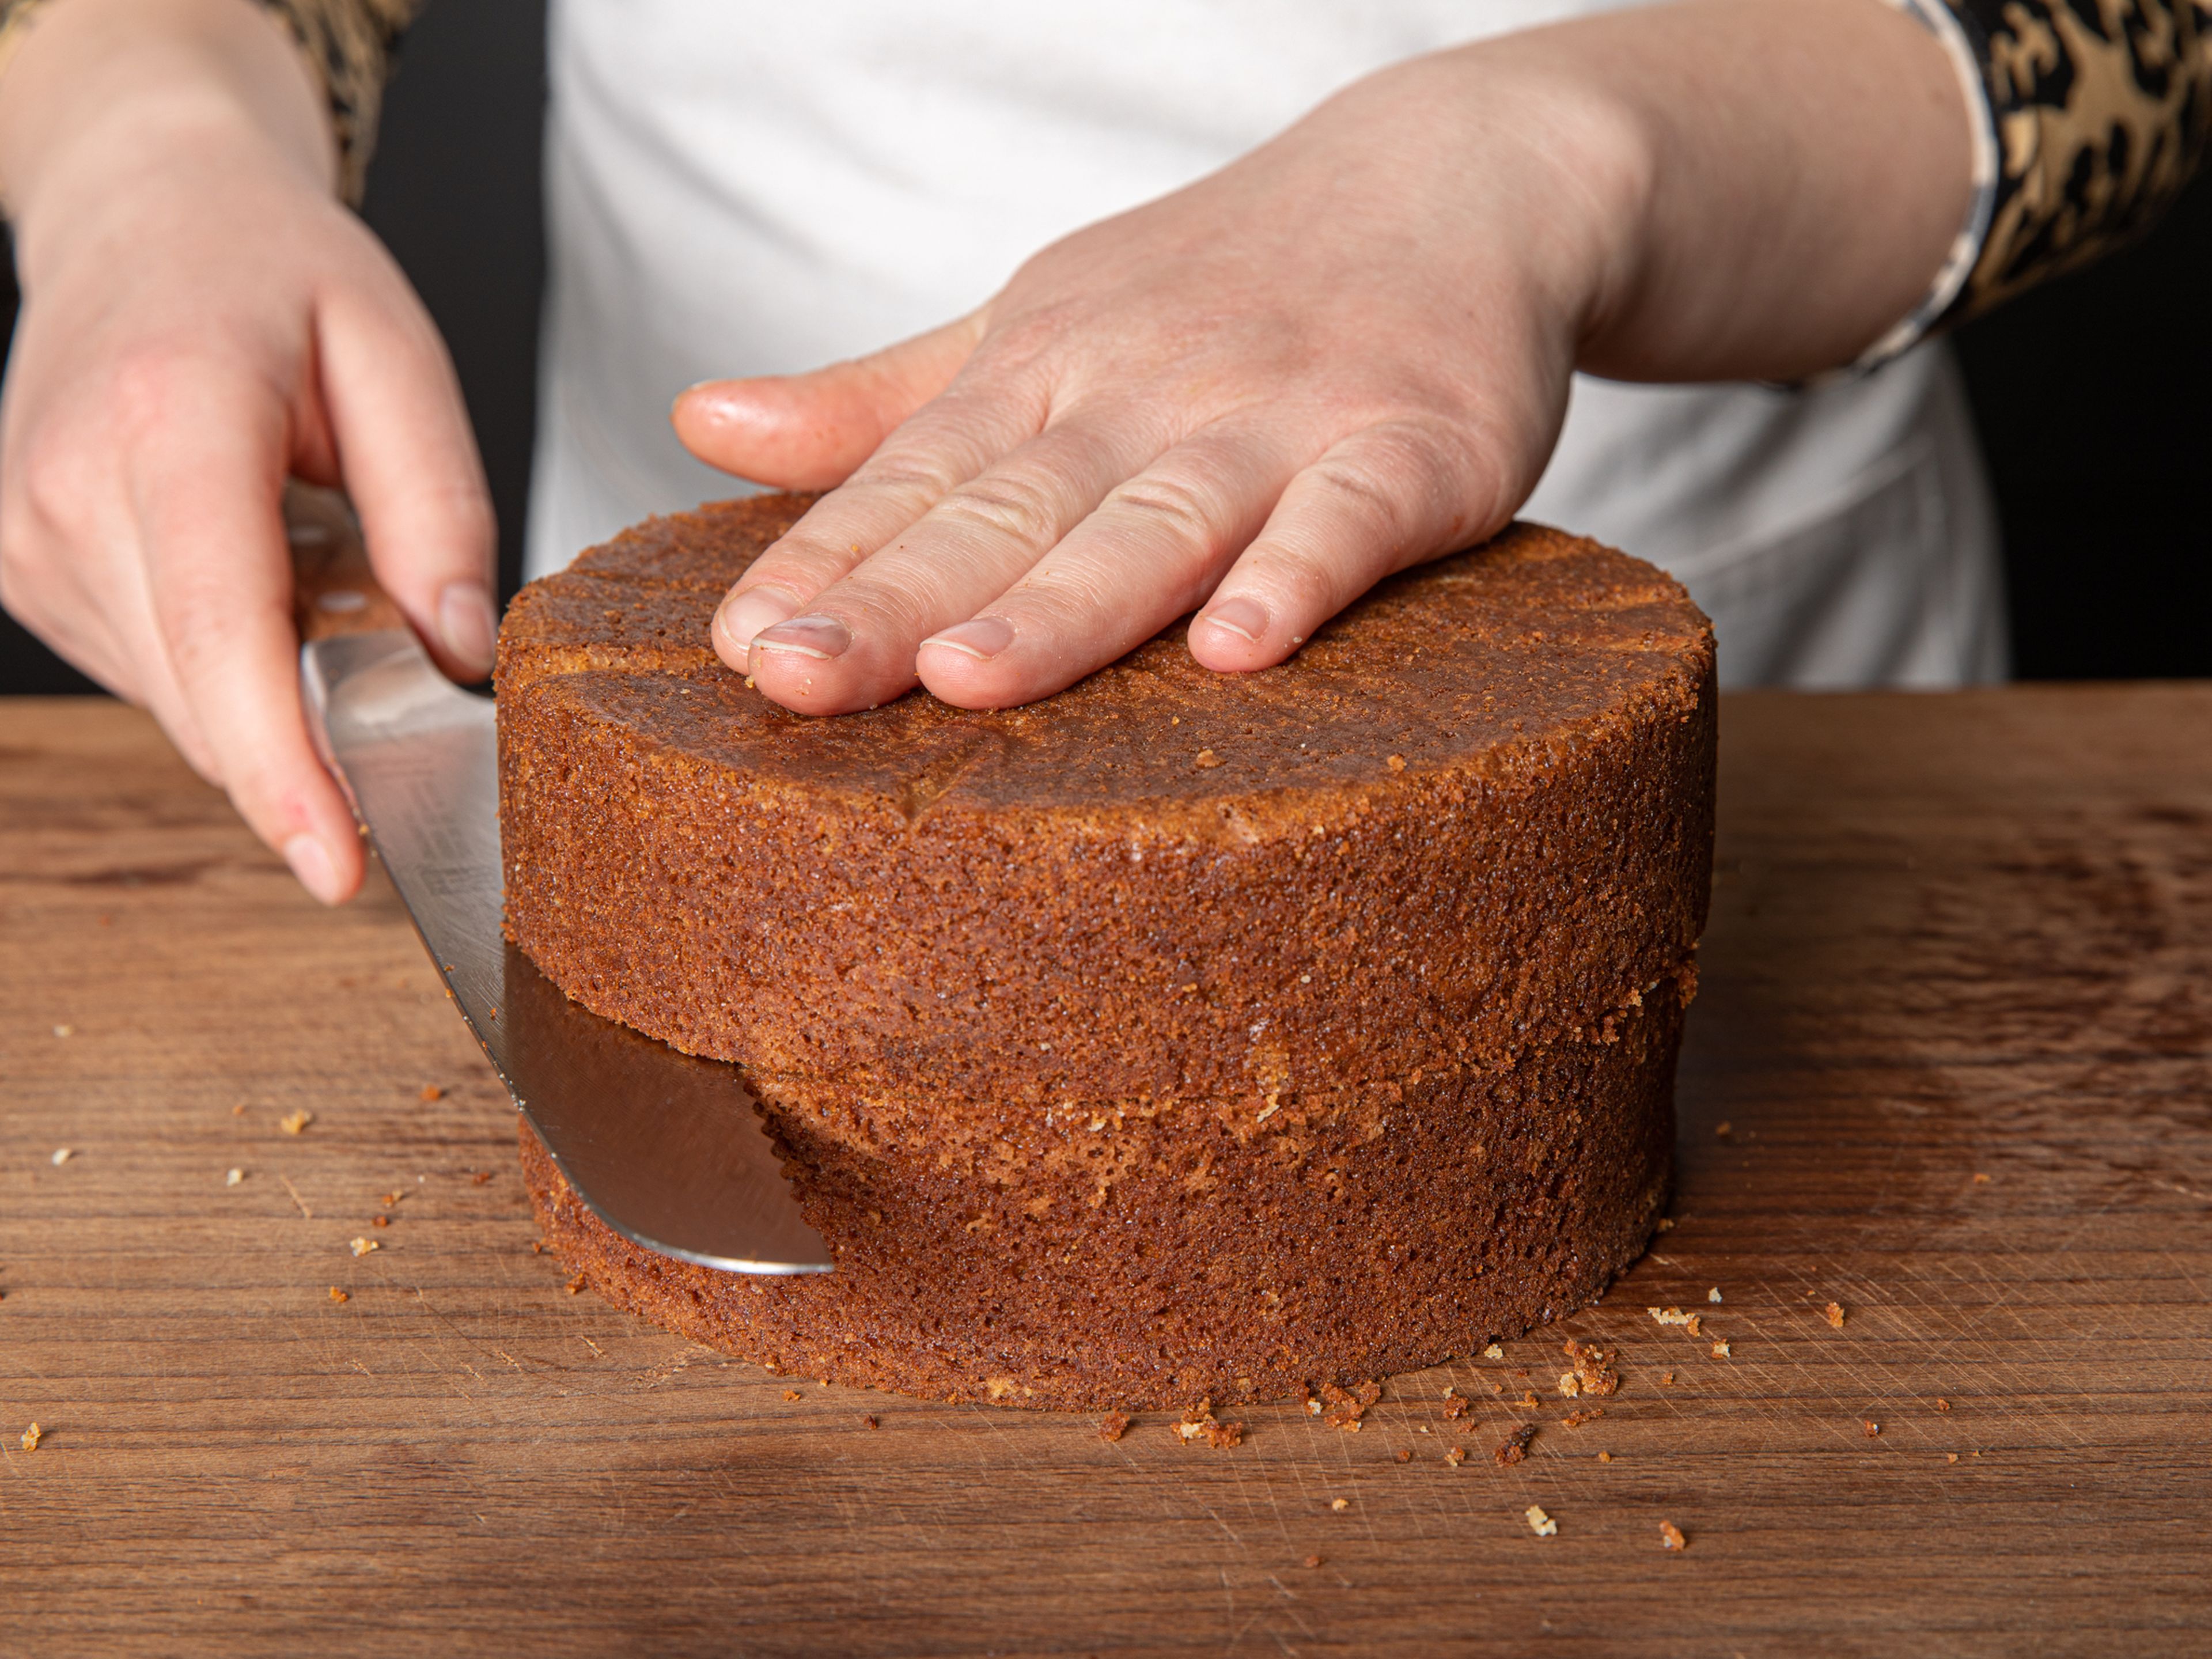 When the cake has cooled completely, carefully remove from the form. If the top is not completely straight, level it with a serrated knife. Now cut the bottom in half lengthwise to make two even layers.